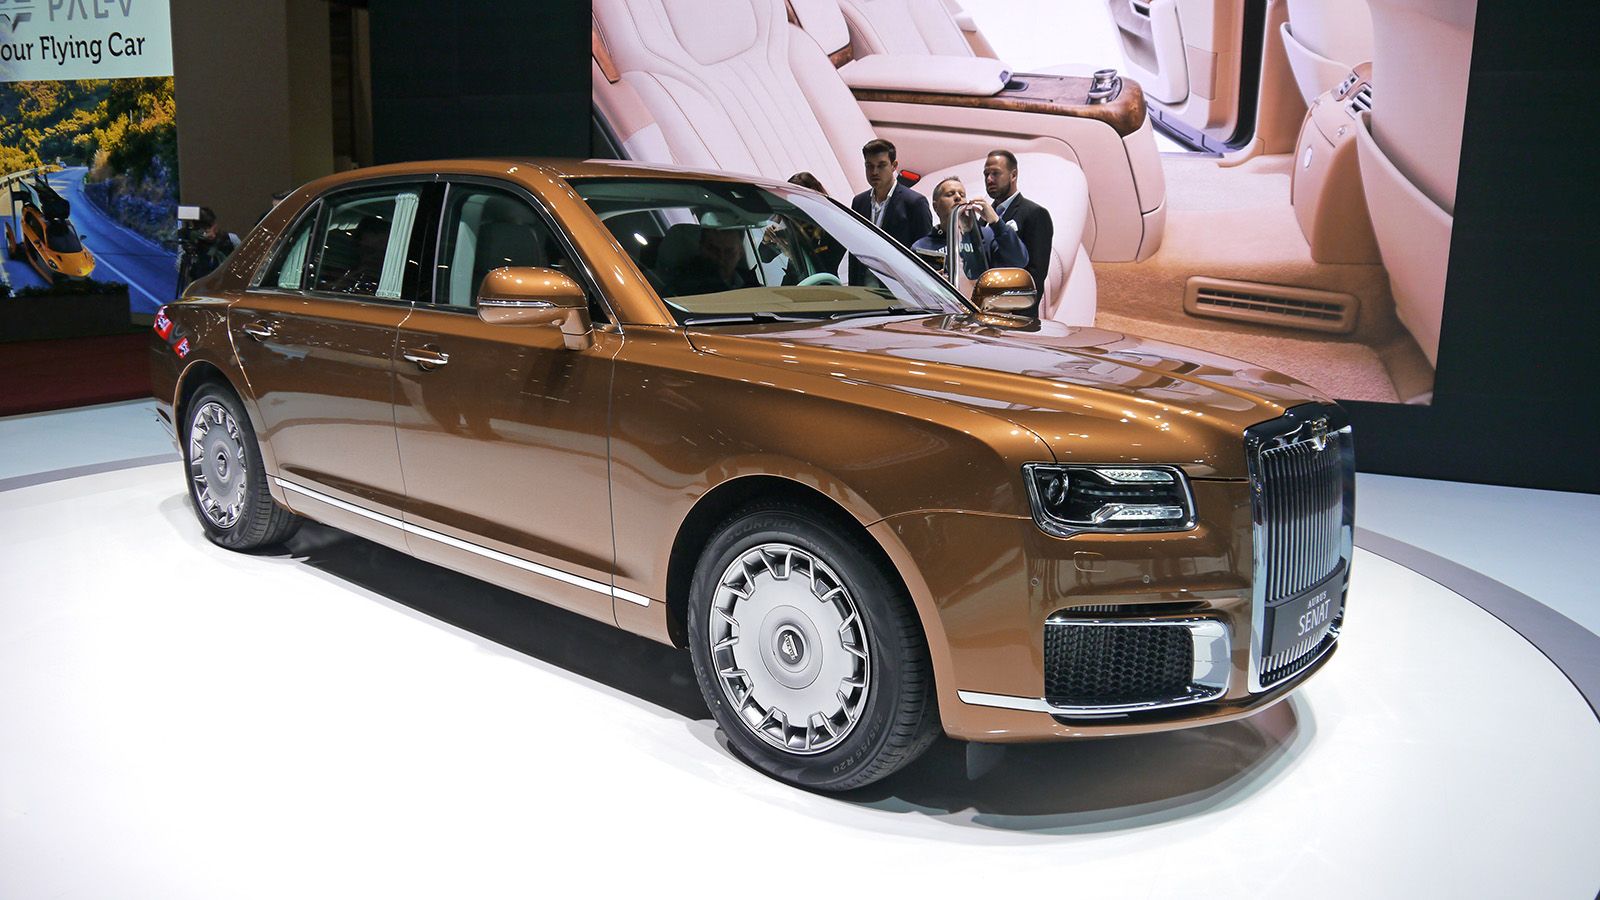 Aurus aims to be Russia's Rolls-Royce